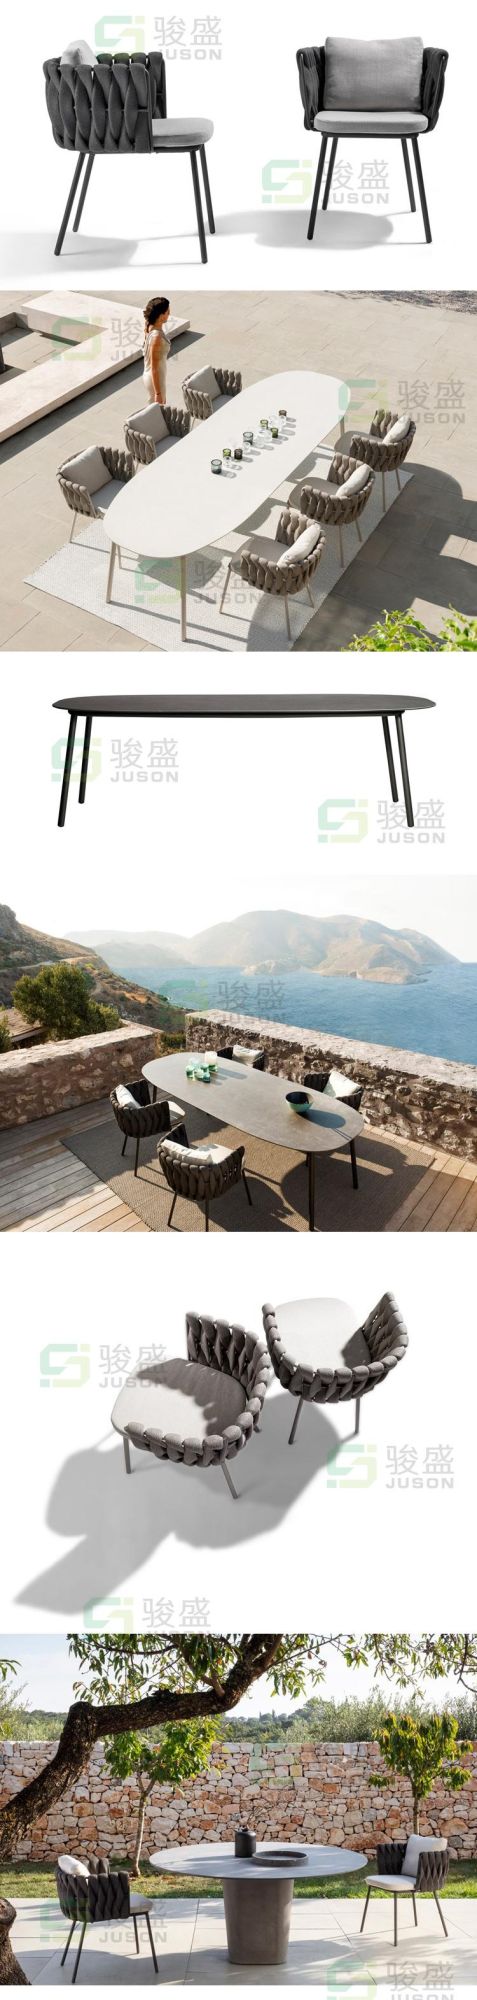 Hot Sale Morden Garden  Furniture  Patio Rattan Chair  and Dining table Hotel Outdoor  Furniture